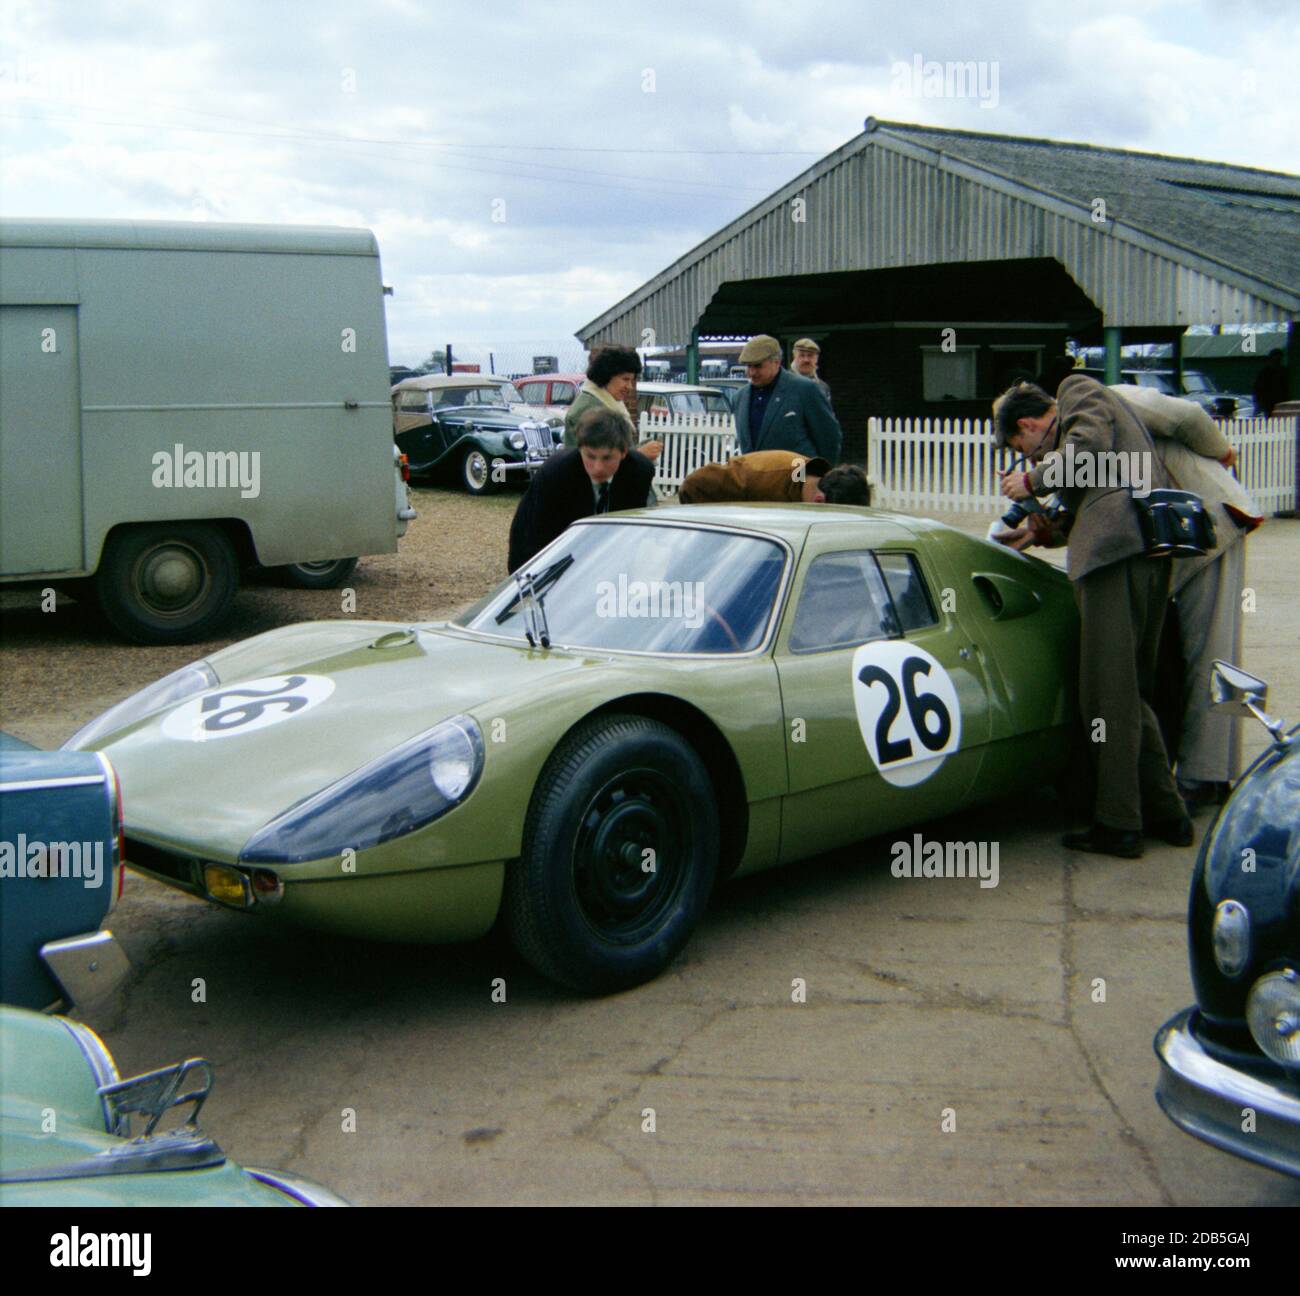 Innes Ireland’s Porsche 904 in the paddock at Silverstone on Practise Day 1st May 1964. Green colour was the hallmark of the Stirling Moss Racing Team Stock Photo